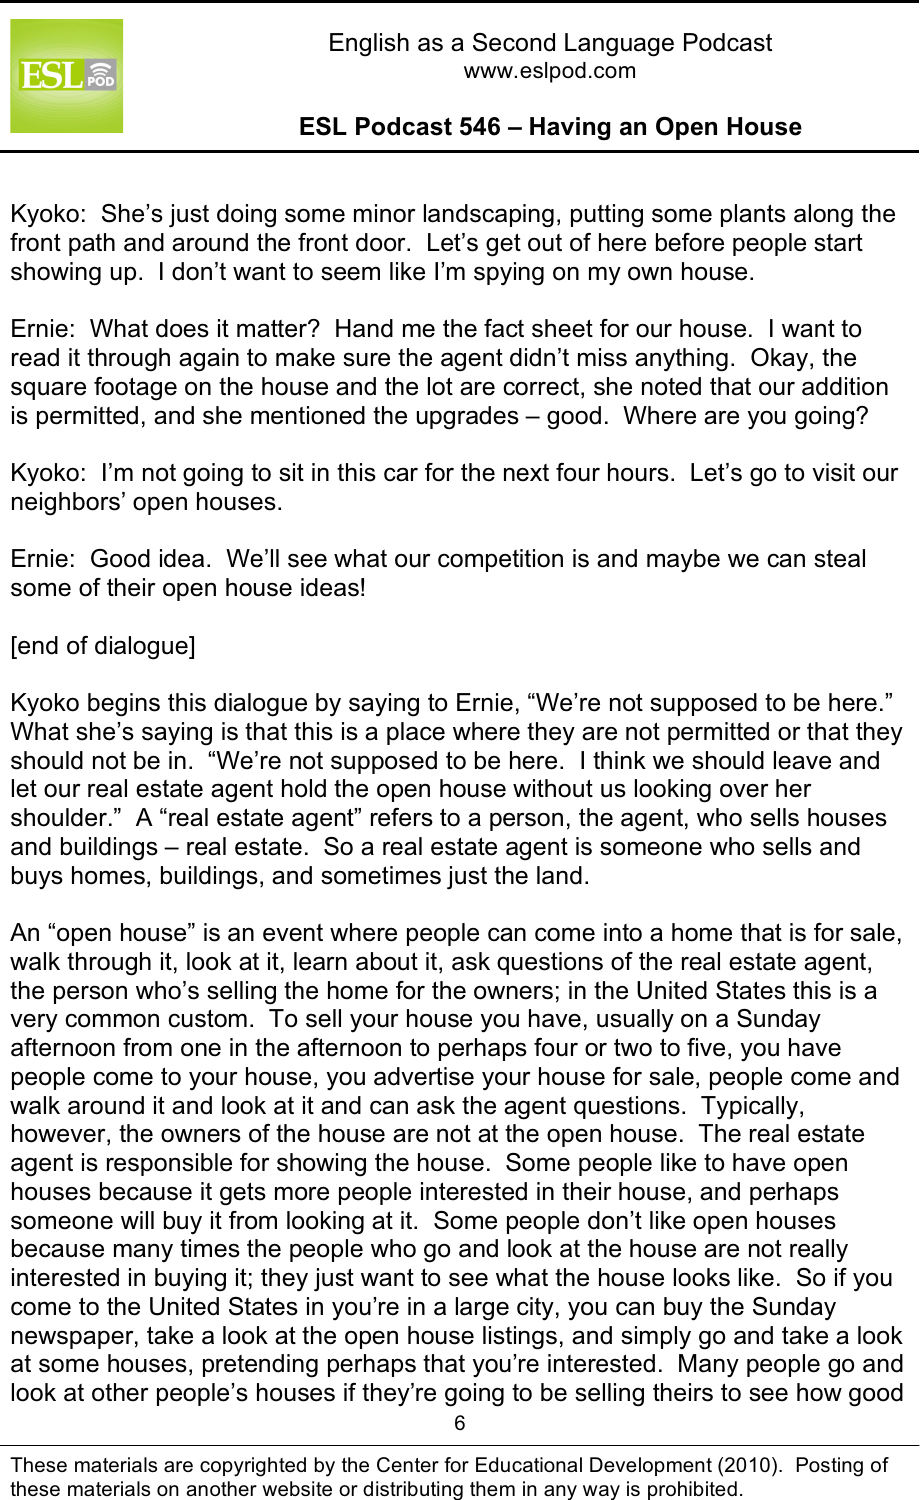 Page 6 of 10 - L_ESLPod_546_Guide ESLPod 546 Guide - Having An Open House